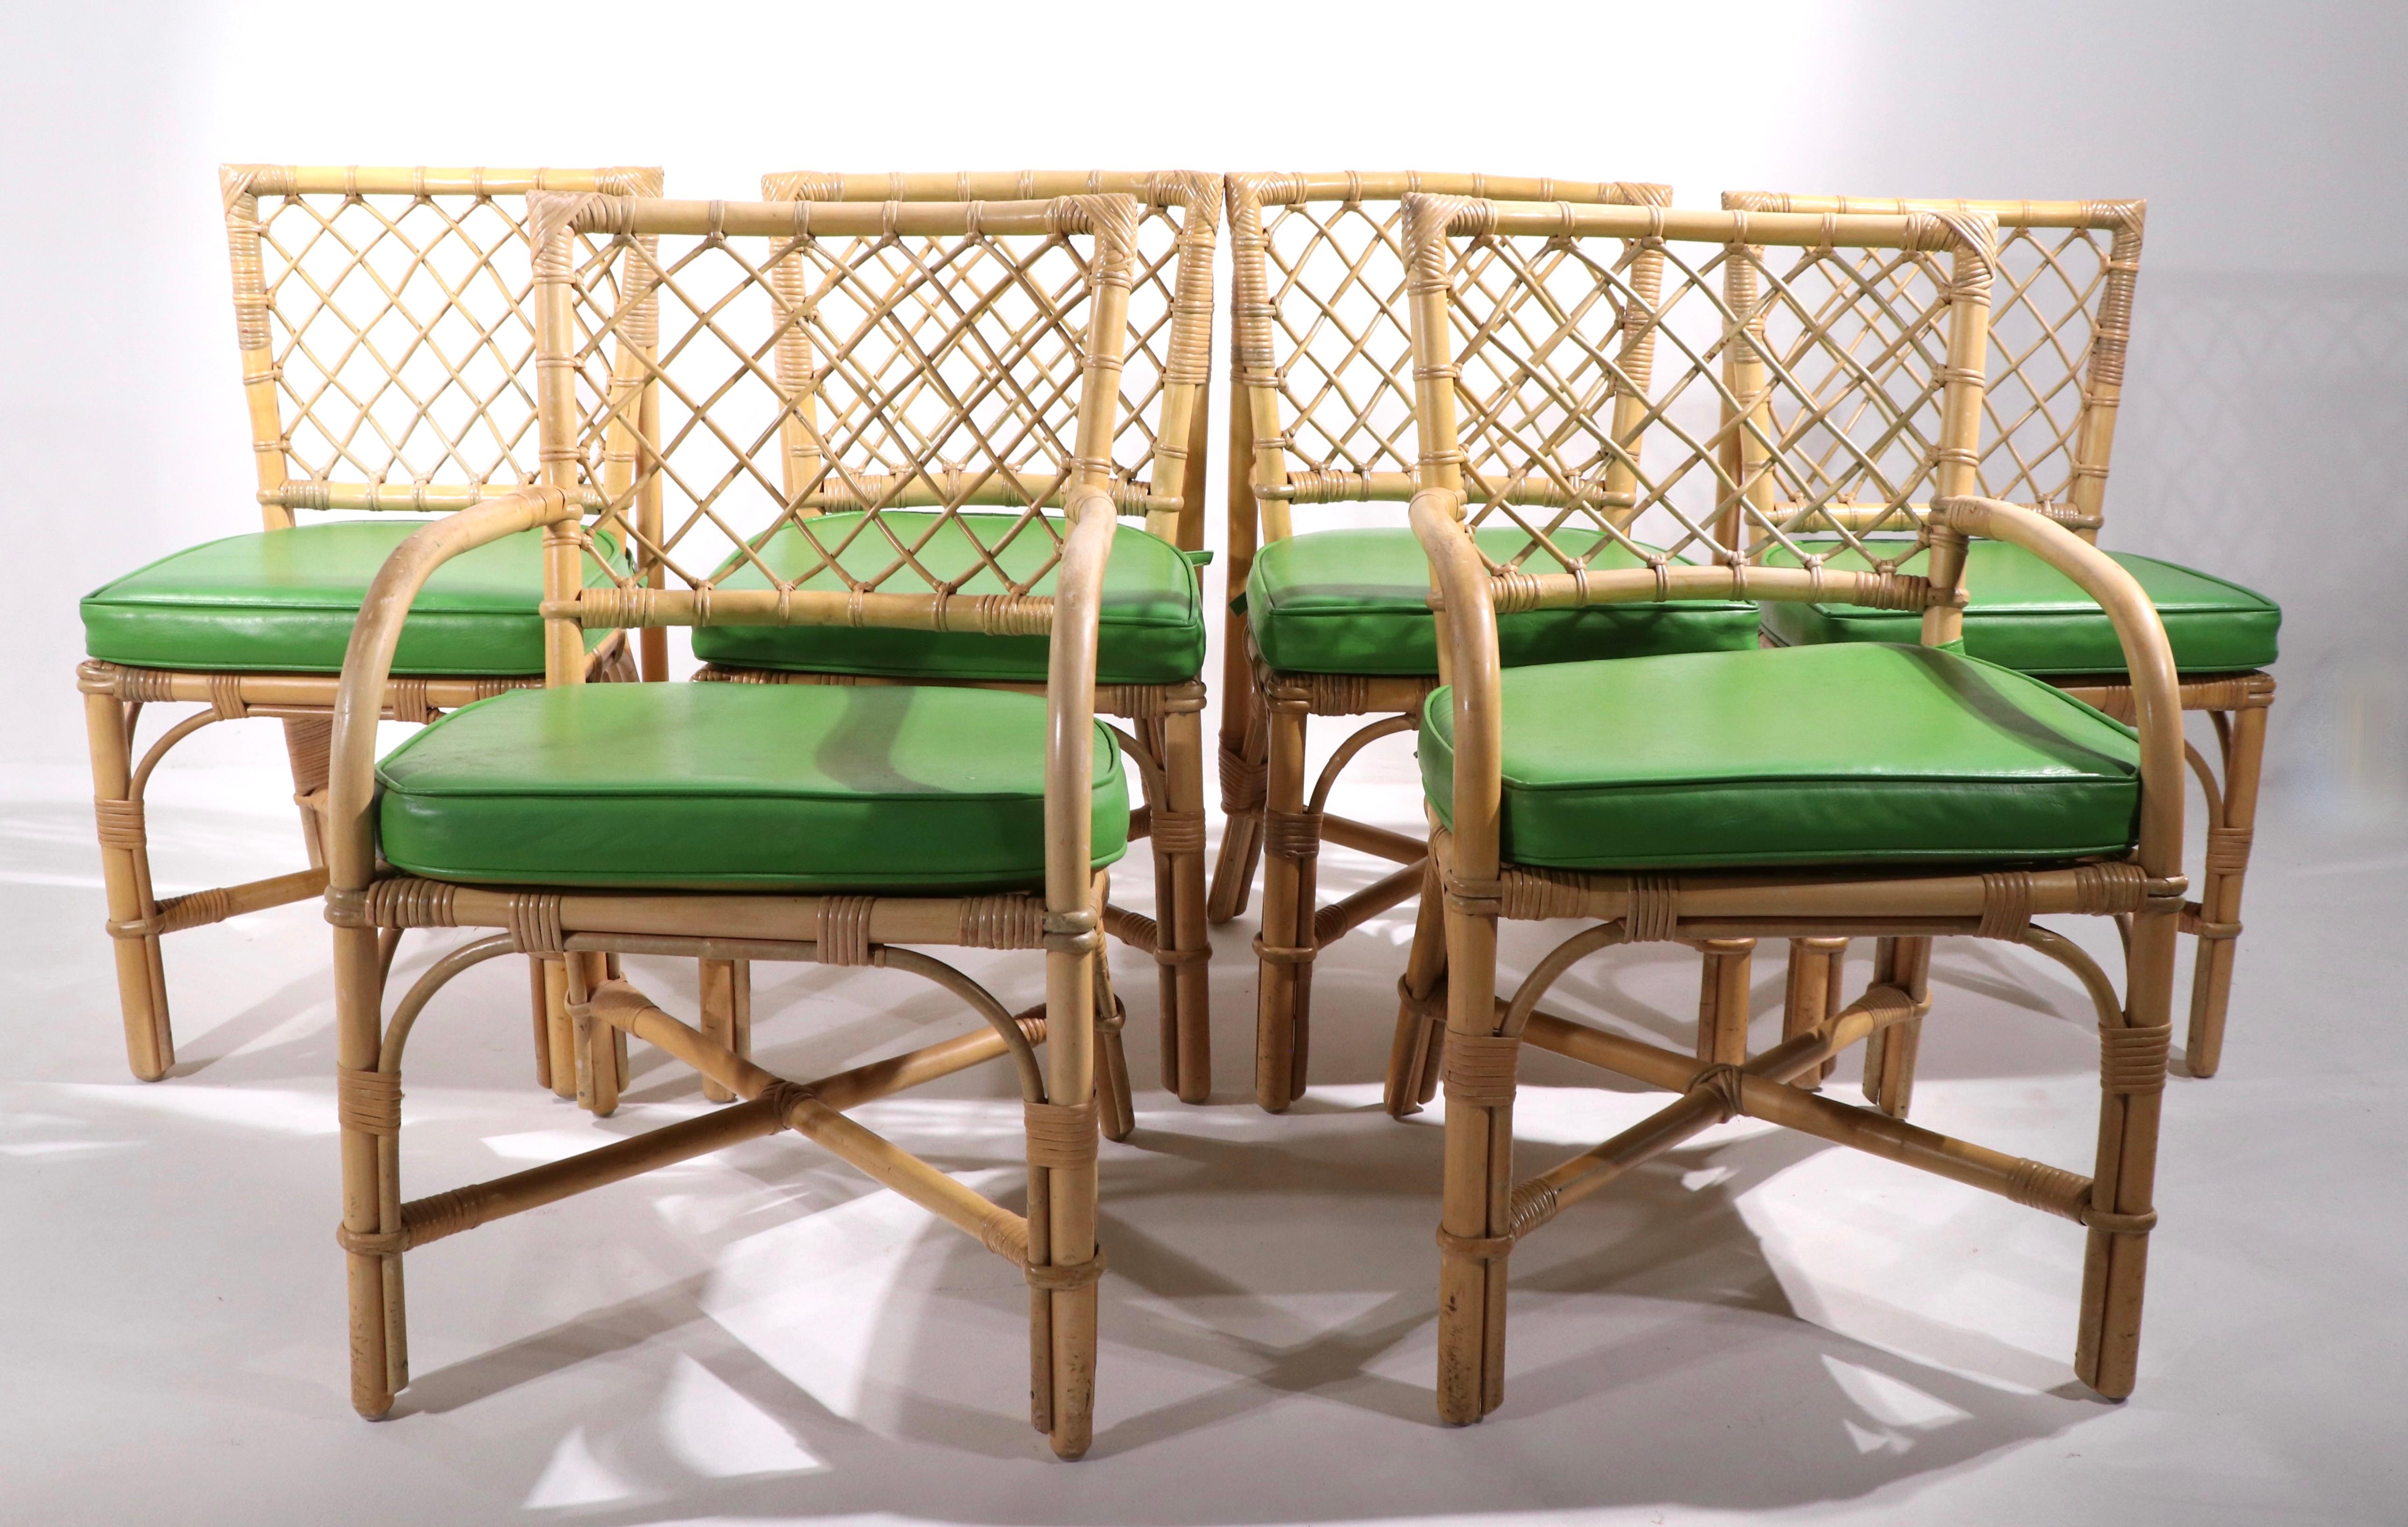 Well constructed set of bamboo dining chairs having lattice work backs, upholstered pad seats. Set consists of 4 arm chairs, and 2 arm, or captains chairs. 
 Dimensions for Arm Chairs
Total H 33 in. x Arm H 24.5 in. x Seat H 18.5 in. x W 20 in. x